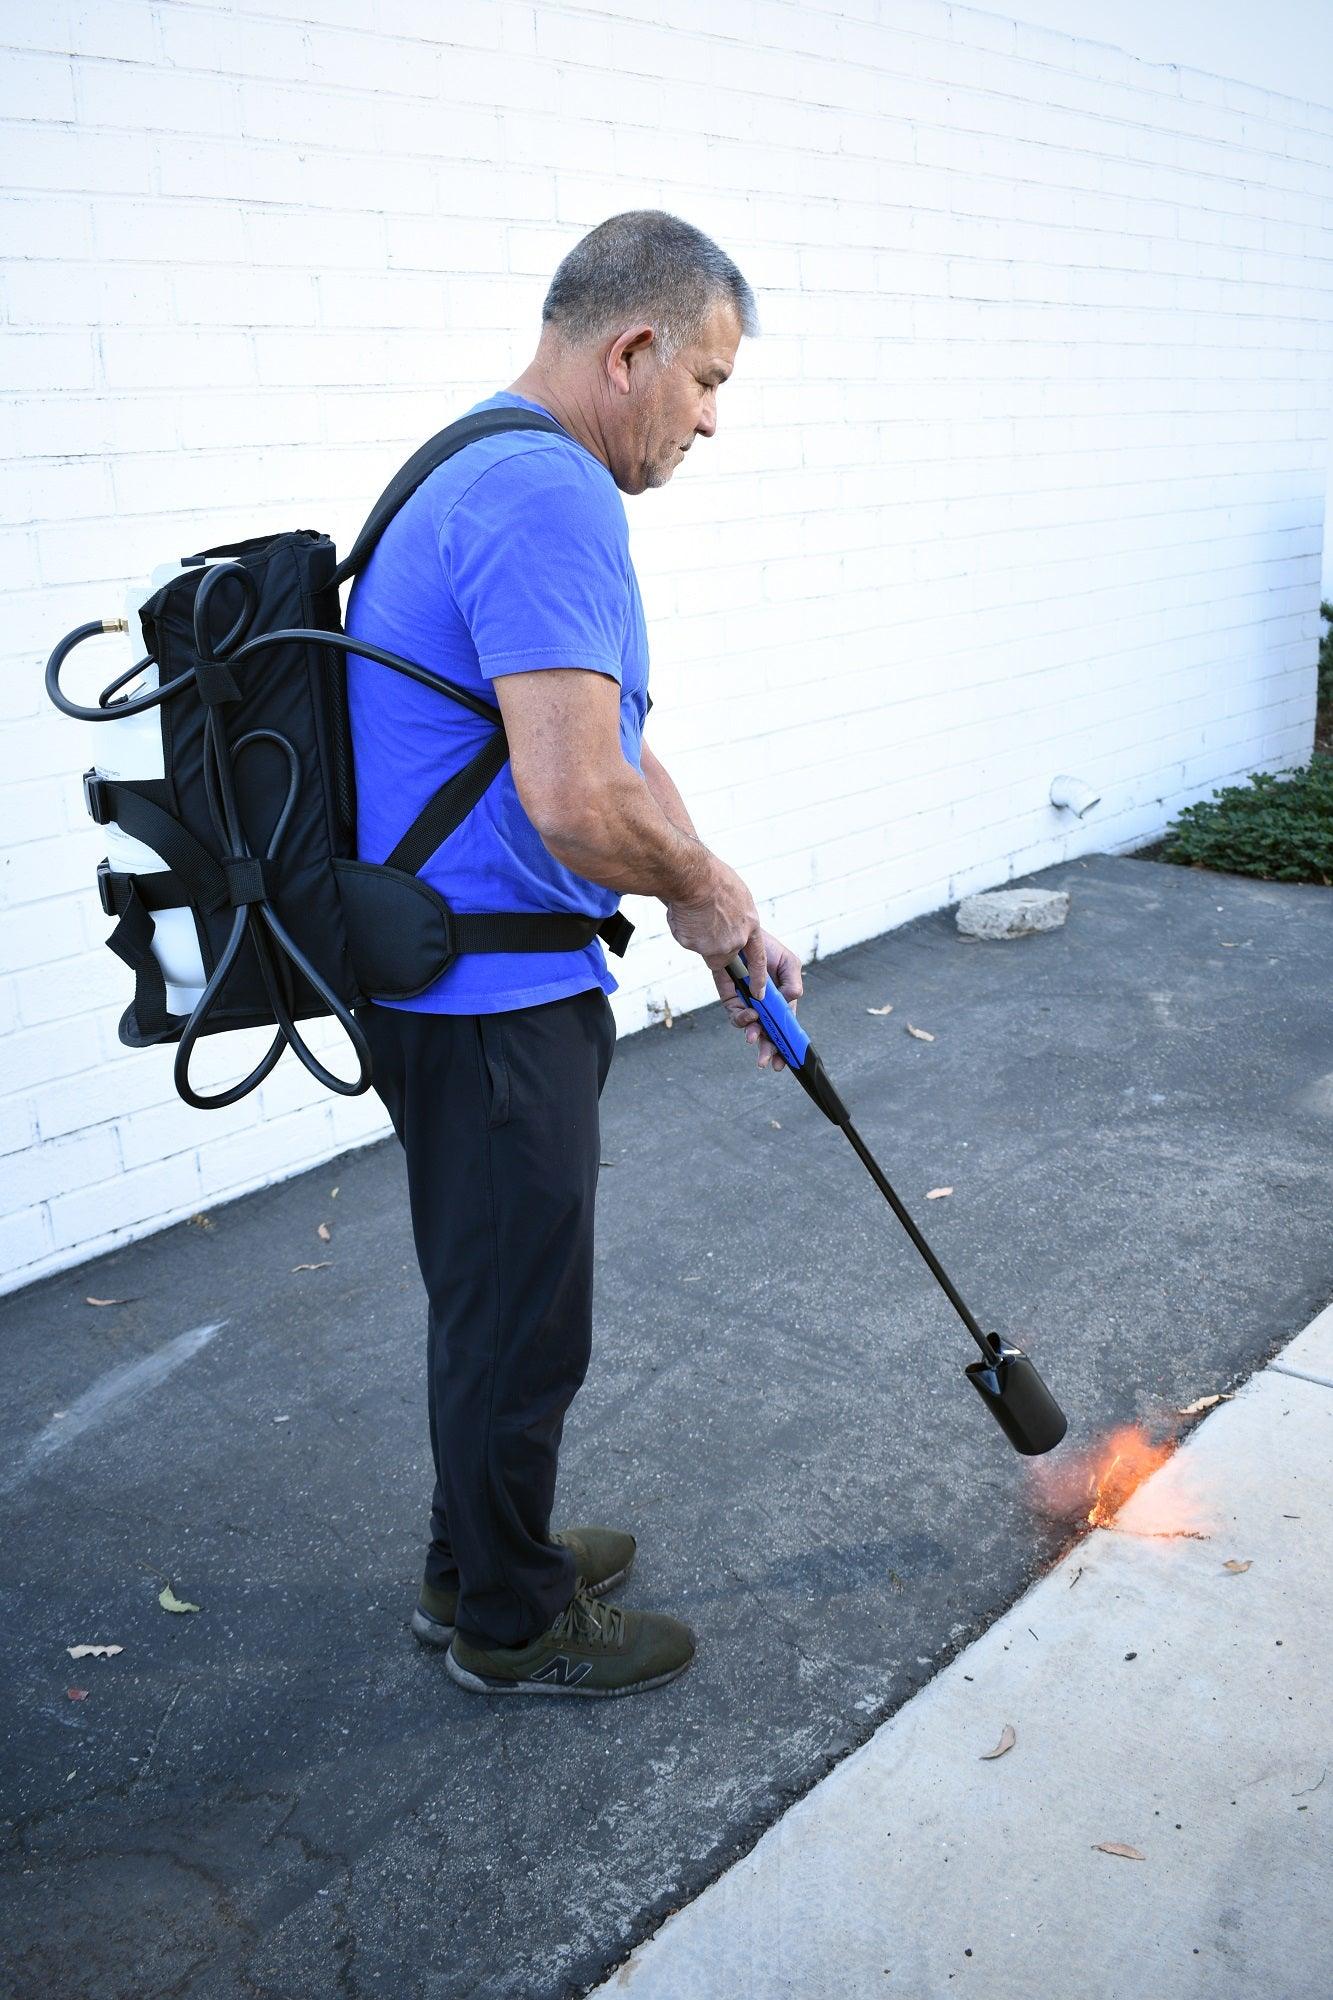 Flame King Weed Burner Torch Backpack for 10LB or 5lb Propane Tank - Flame King